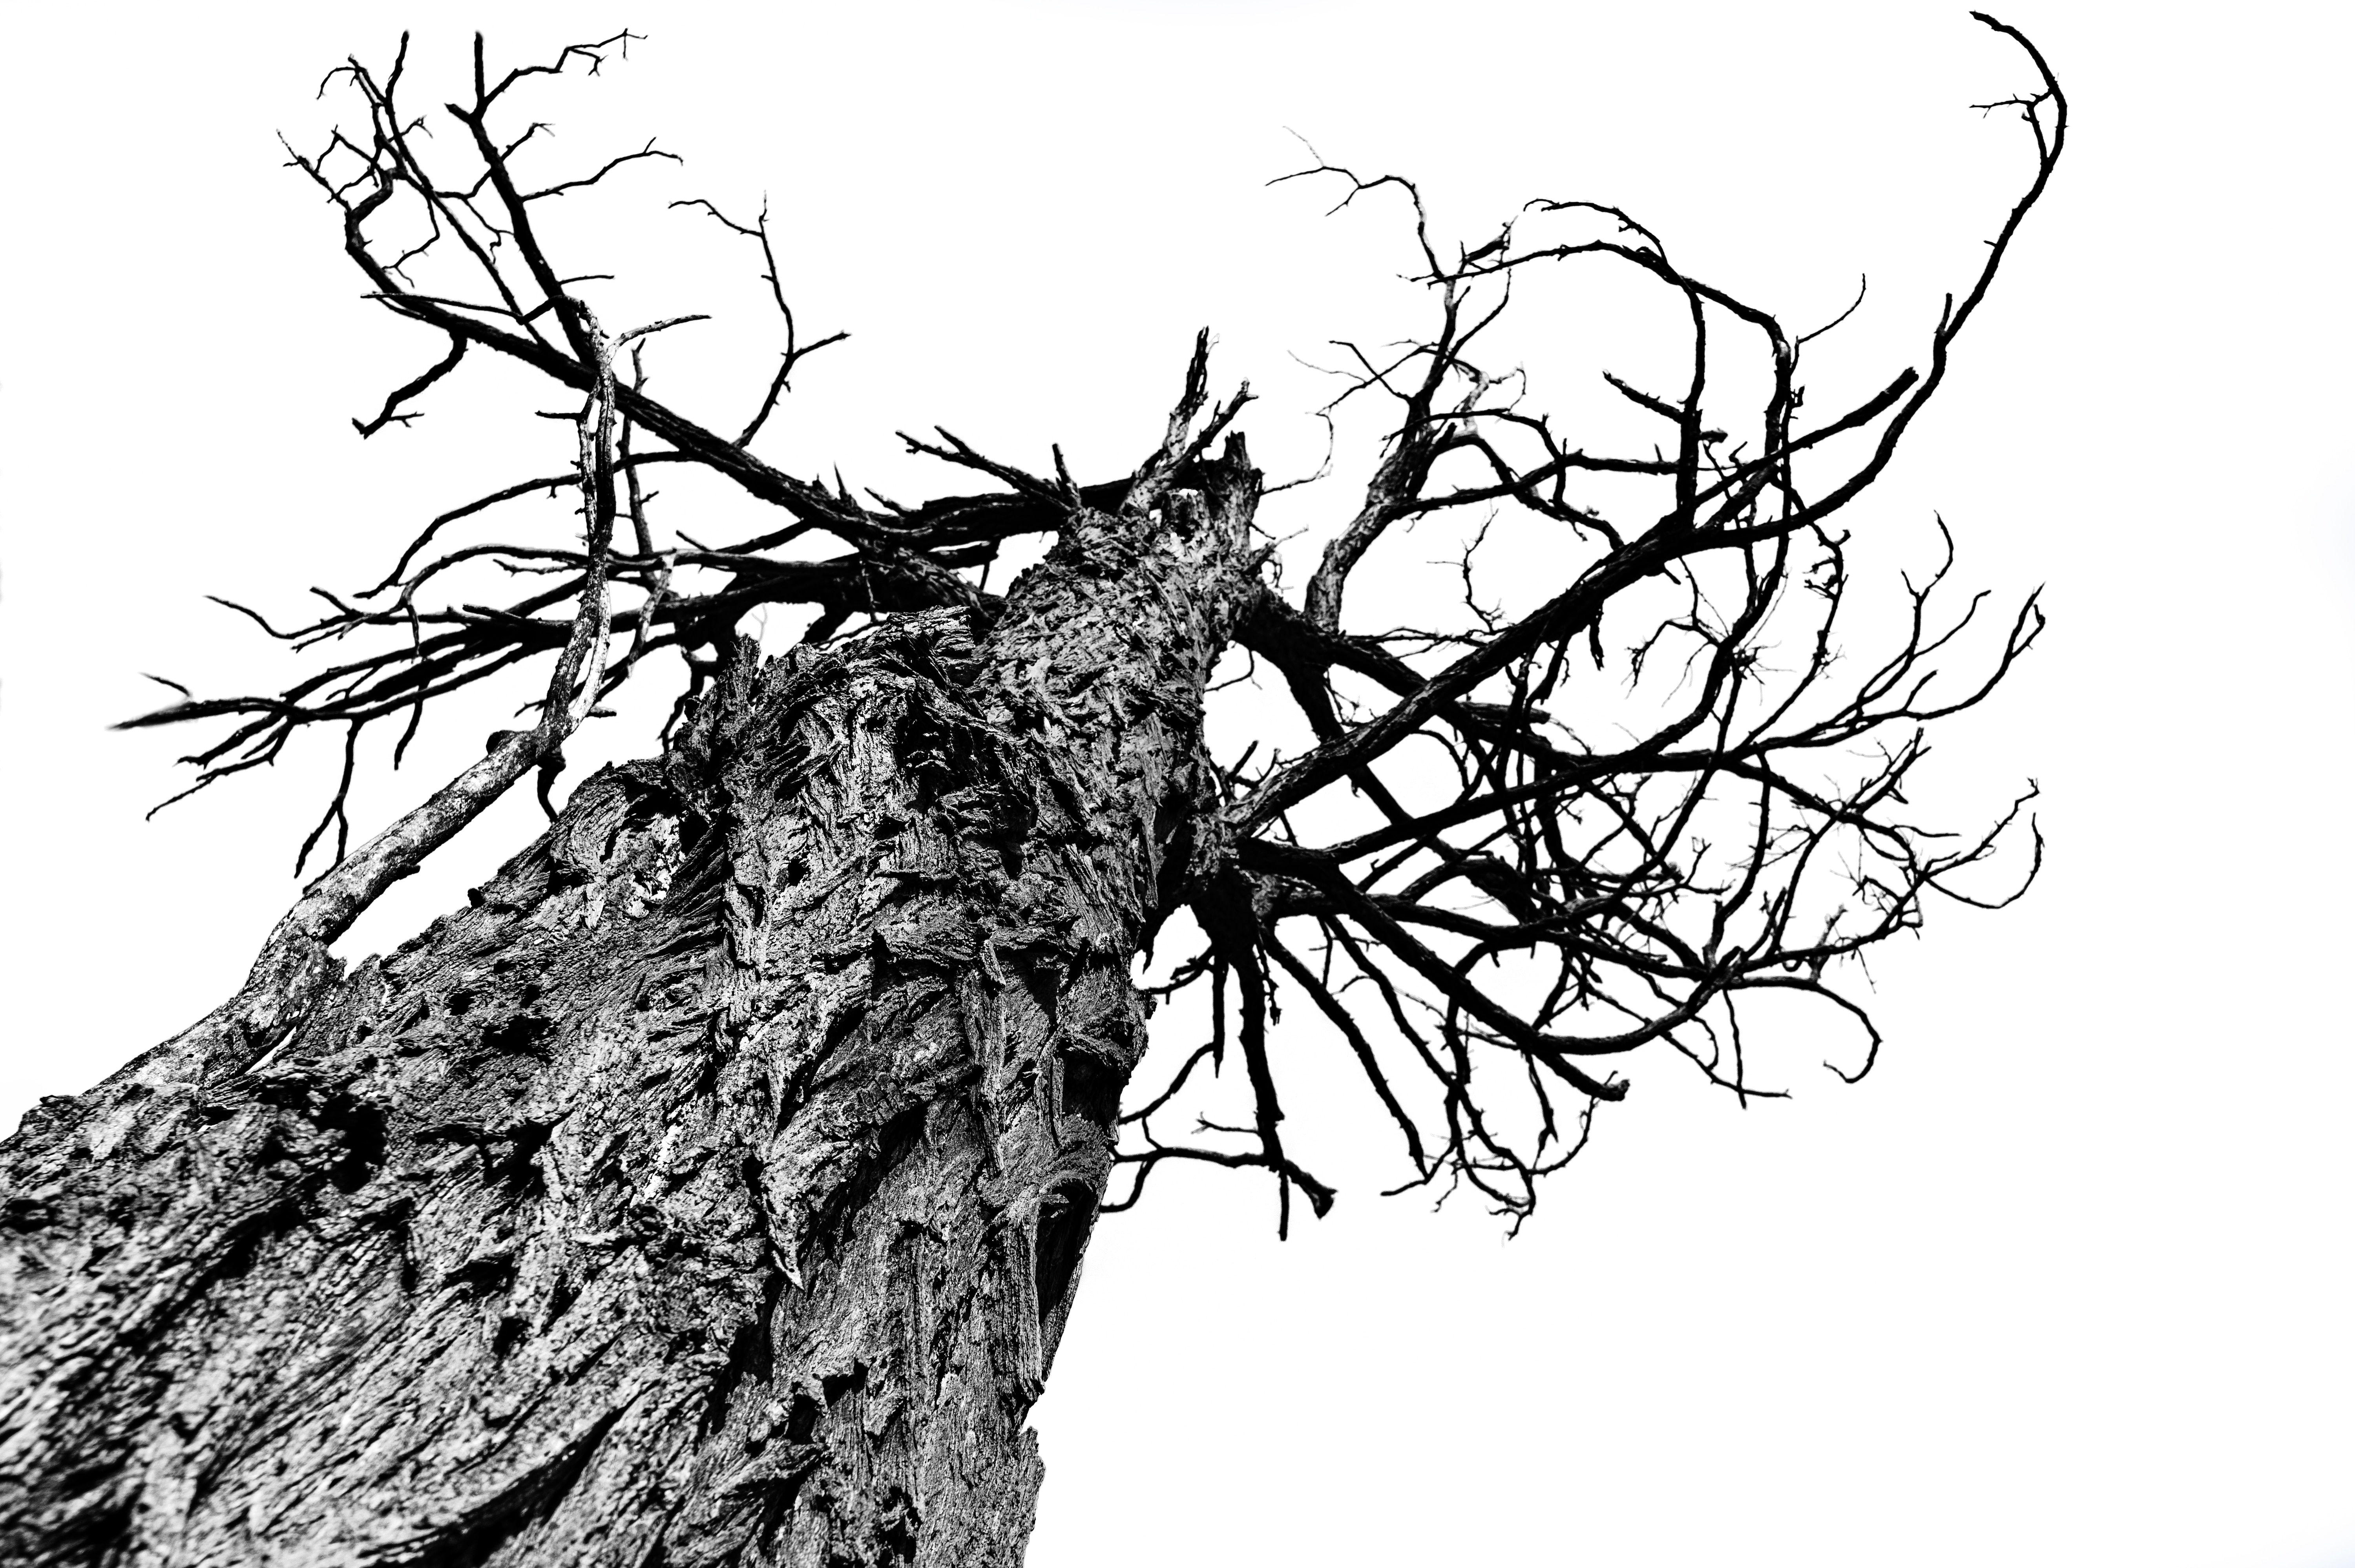 grayscale photography of bare tree